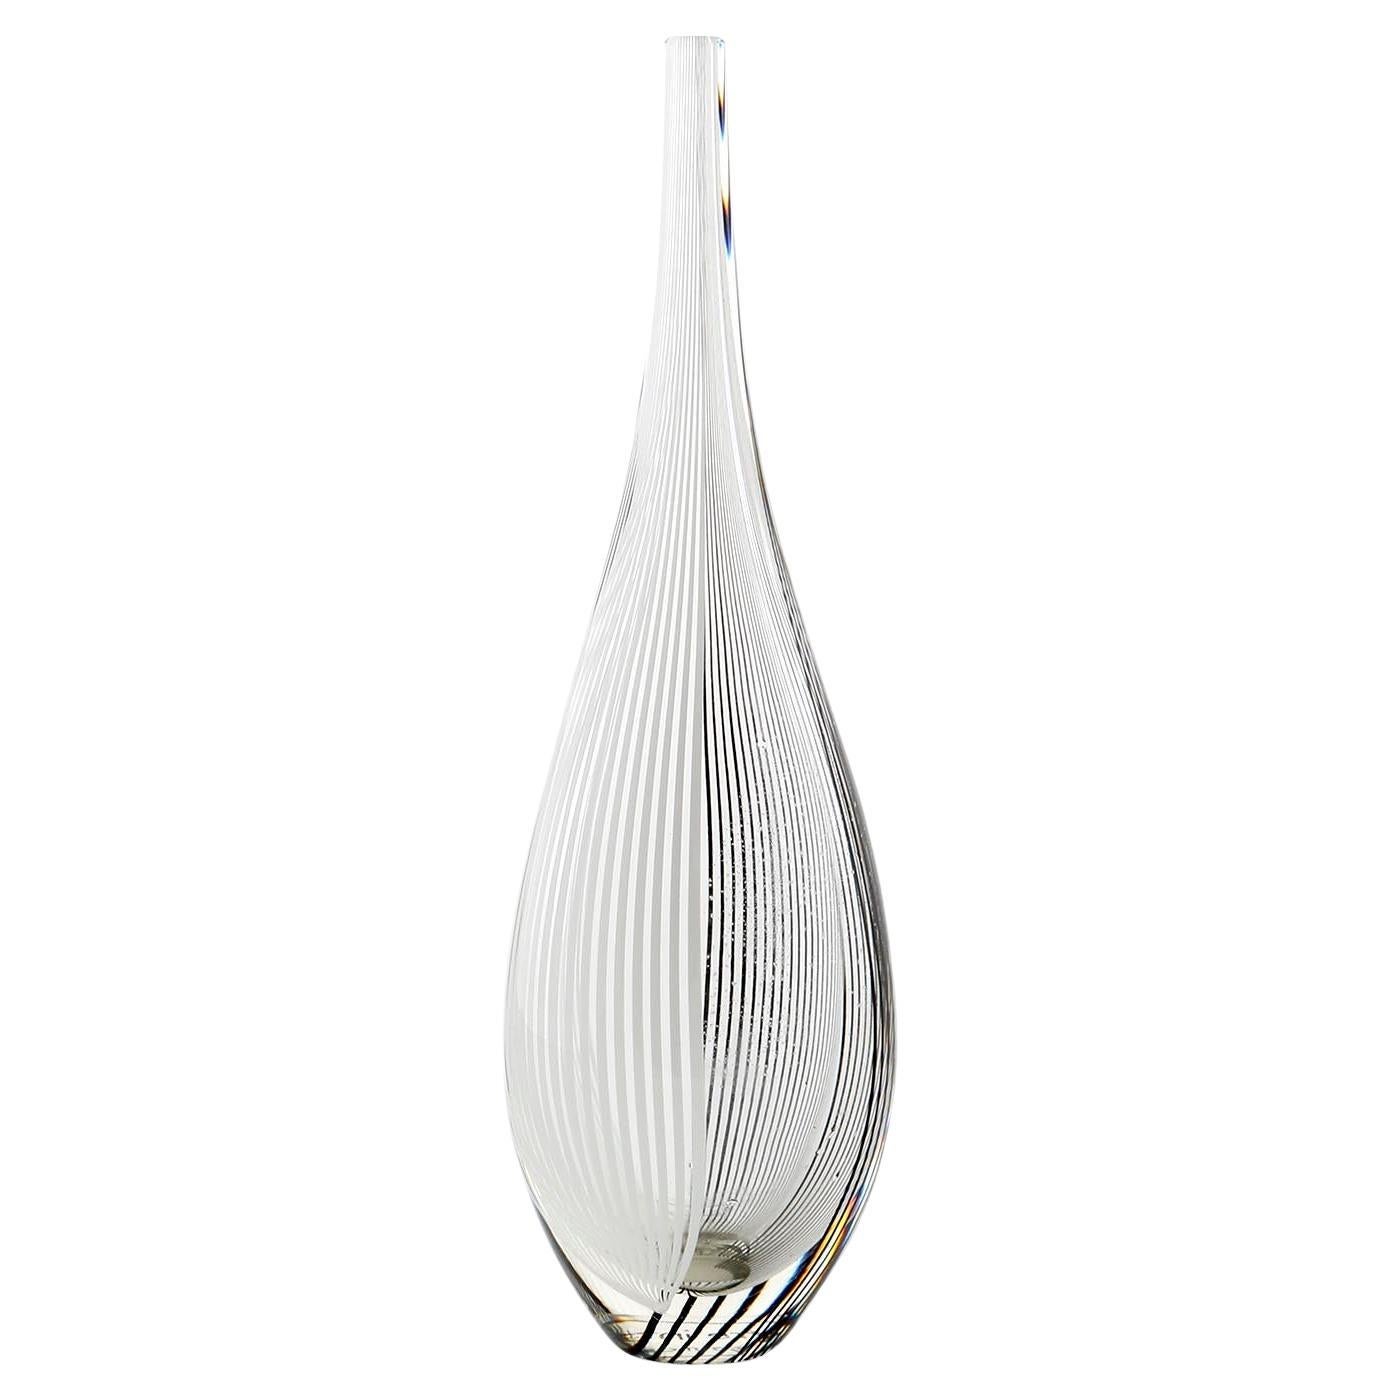 Modern Vase Lino Tagliapietra for Effetre Italy, Black White Stripped Clear Glass, 1987 For Sale